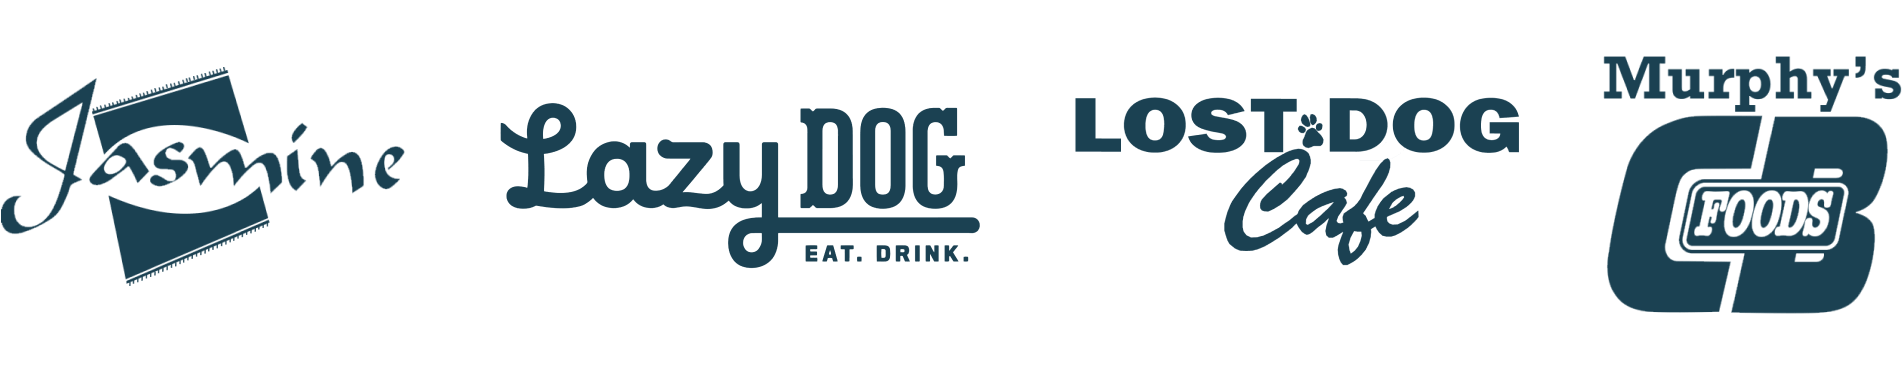 Logos for OpSense customers Jasmine Seafood, Lazy Dog, Lost Dog Cafe, and Murphy's Foods